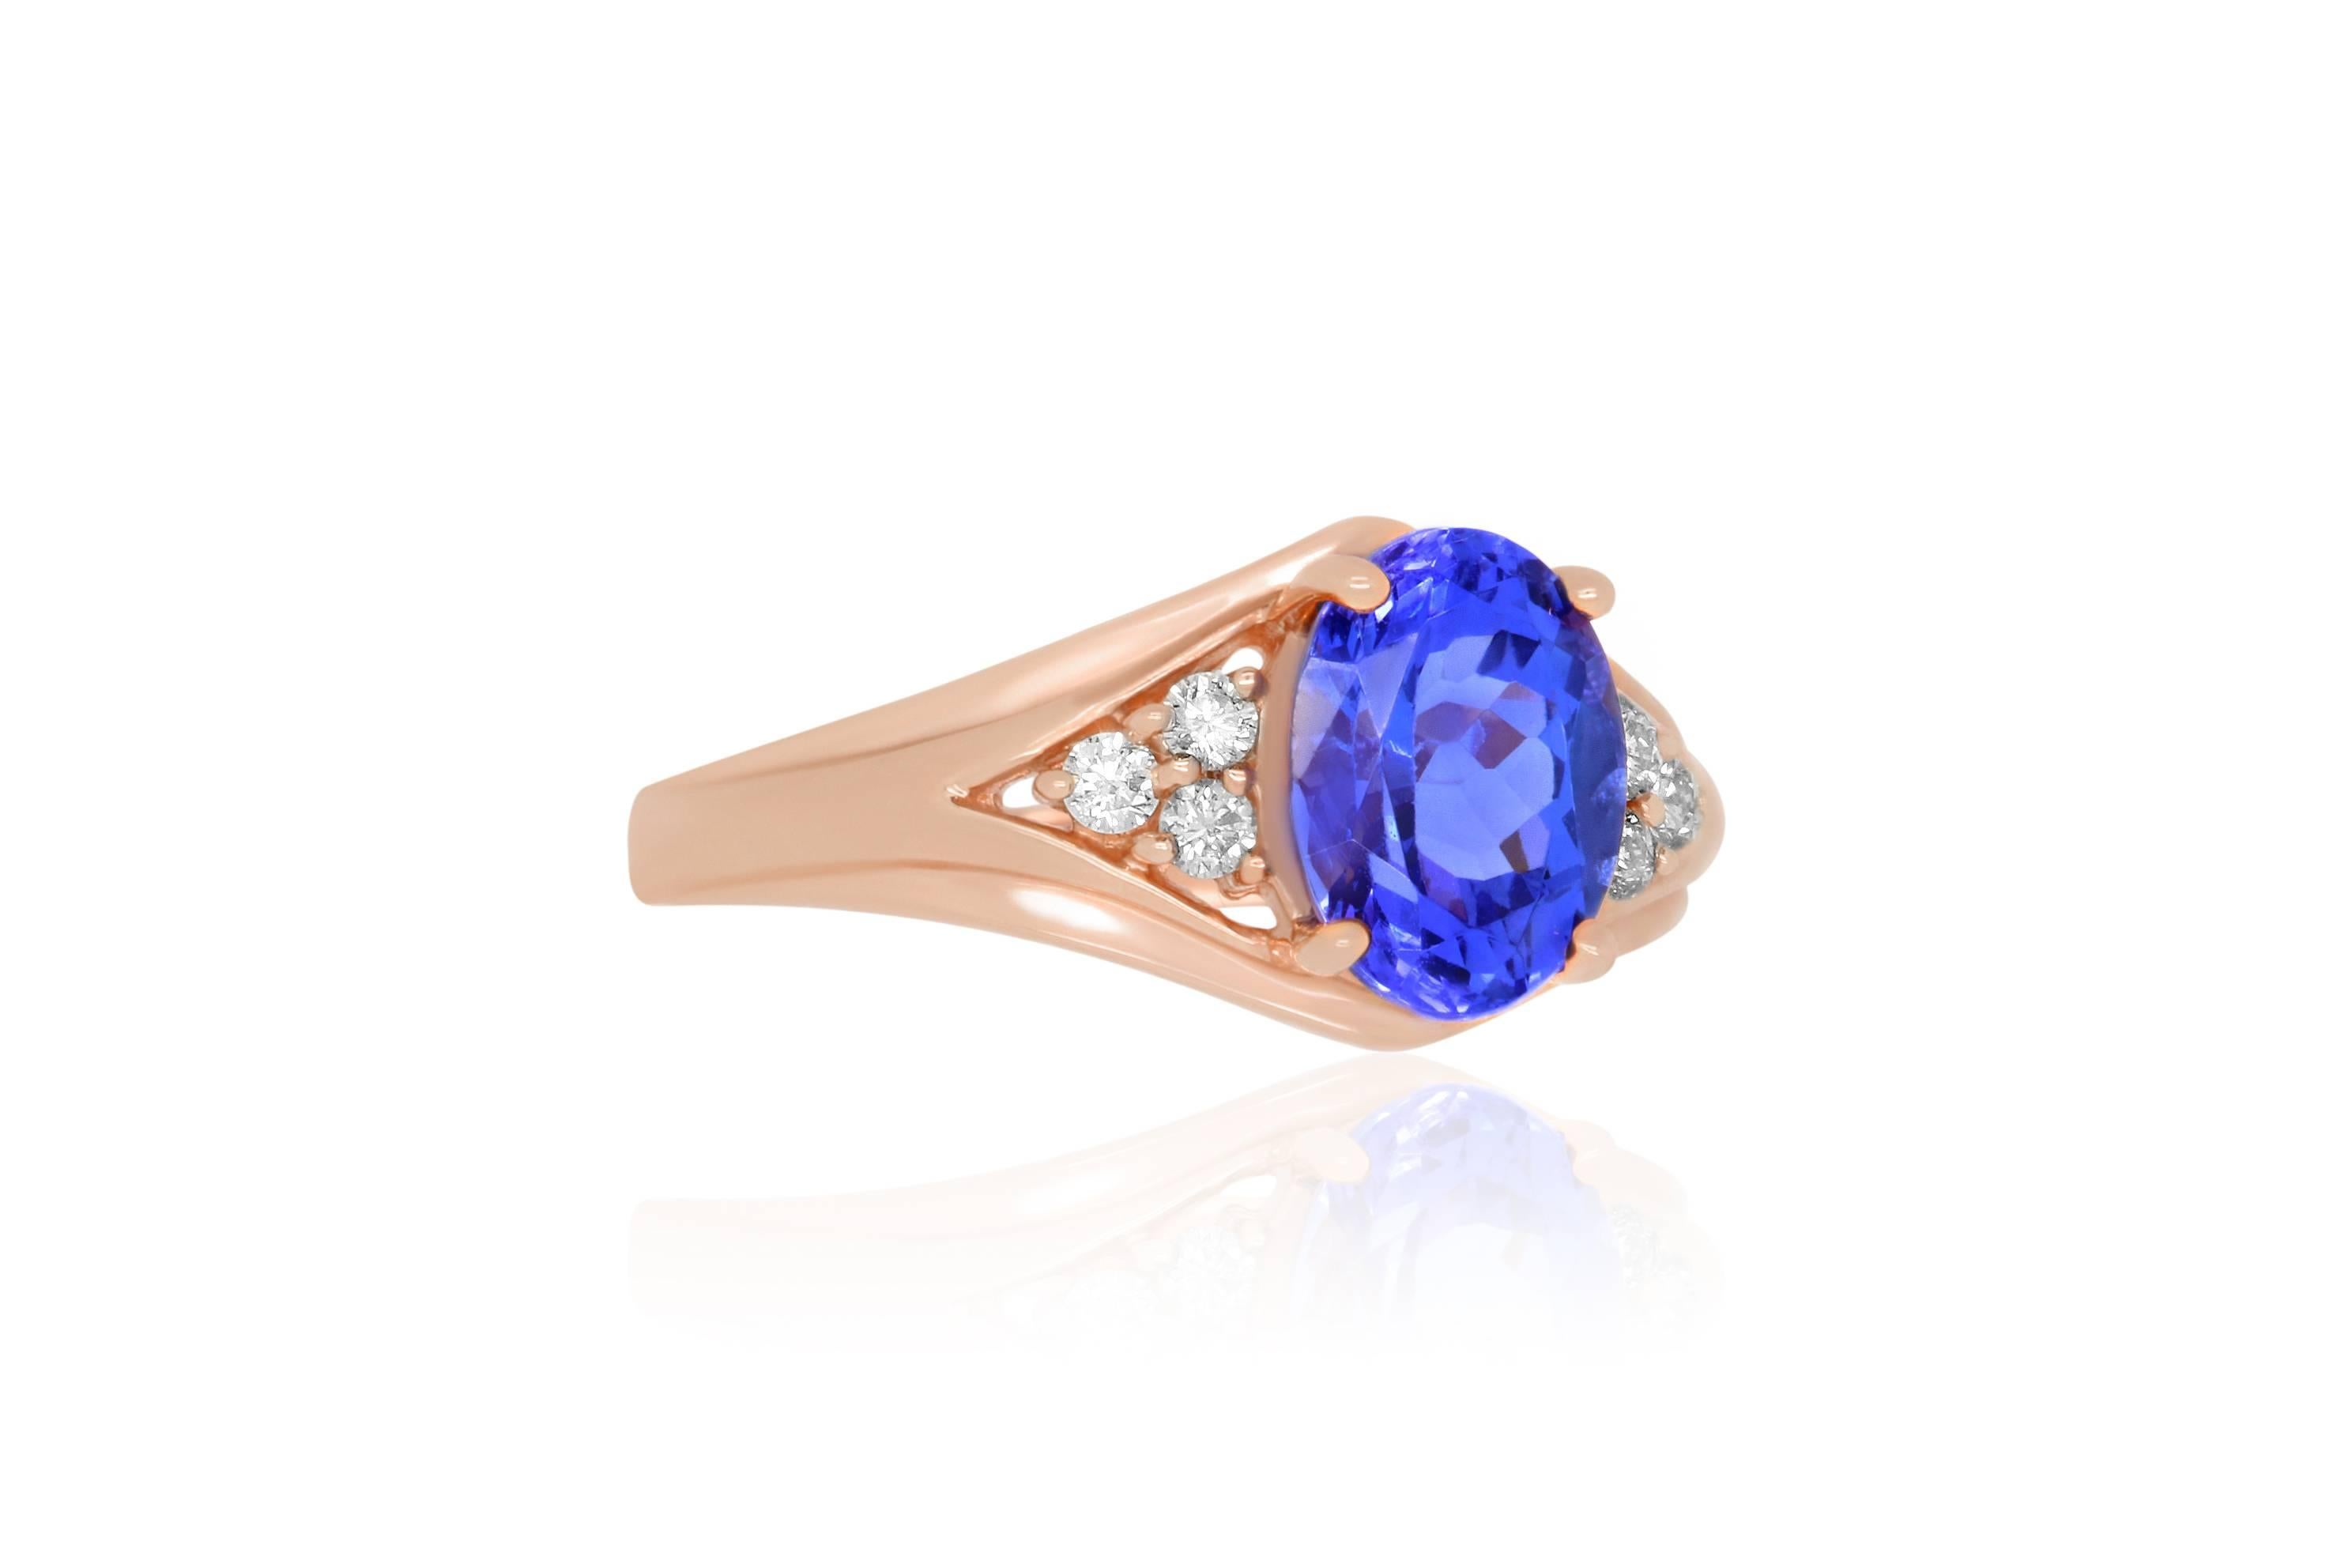 This beautiful Oval cut Tanzanite will shine as the vocal point of this piece. Set in 14k Rose Gold, the band sparkles with 0.13 carat brilliant round diamonds creating a seriously stunning look.

Material: 14k Rose Gold
Gemstones: 1 Oval shaped